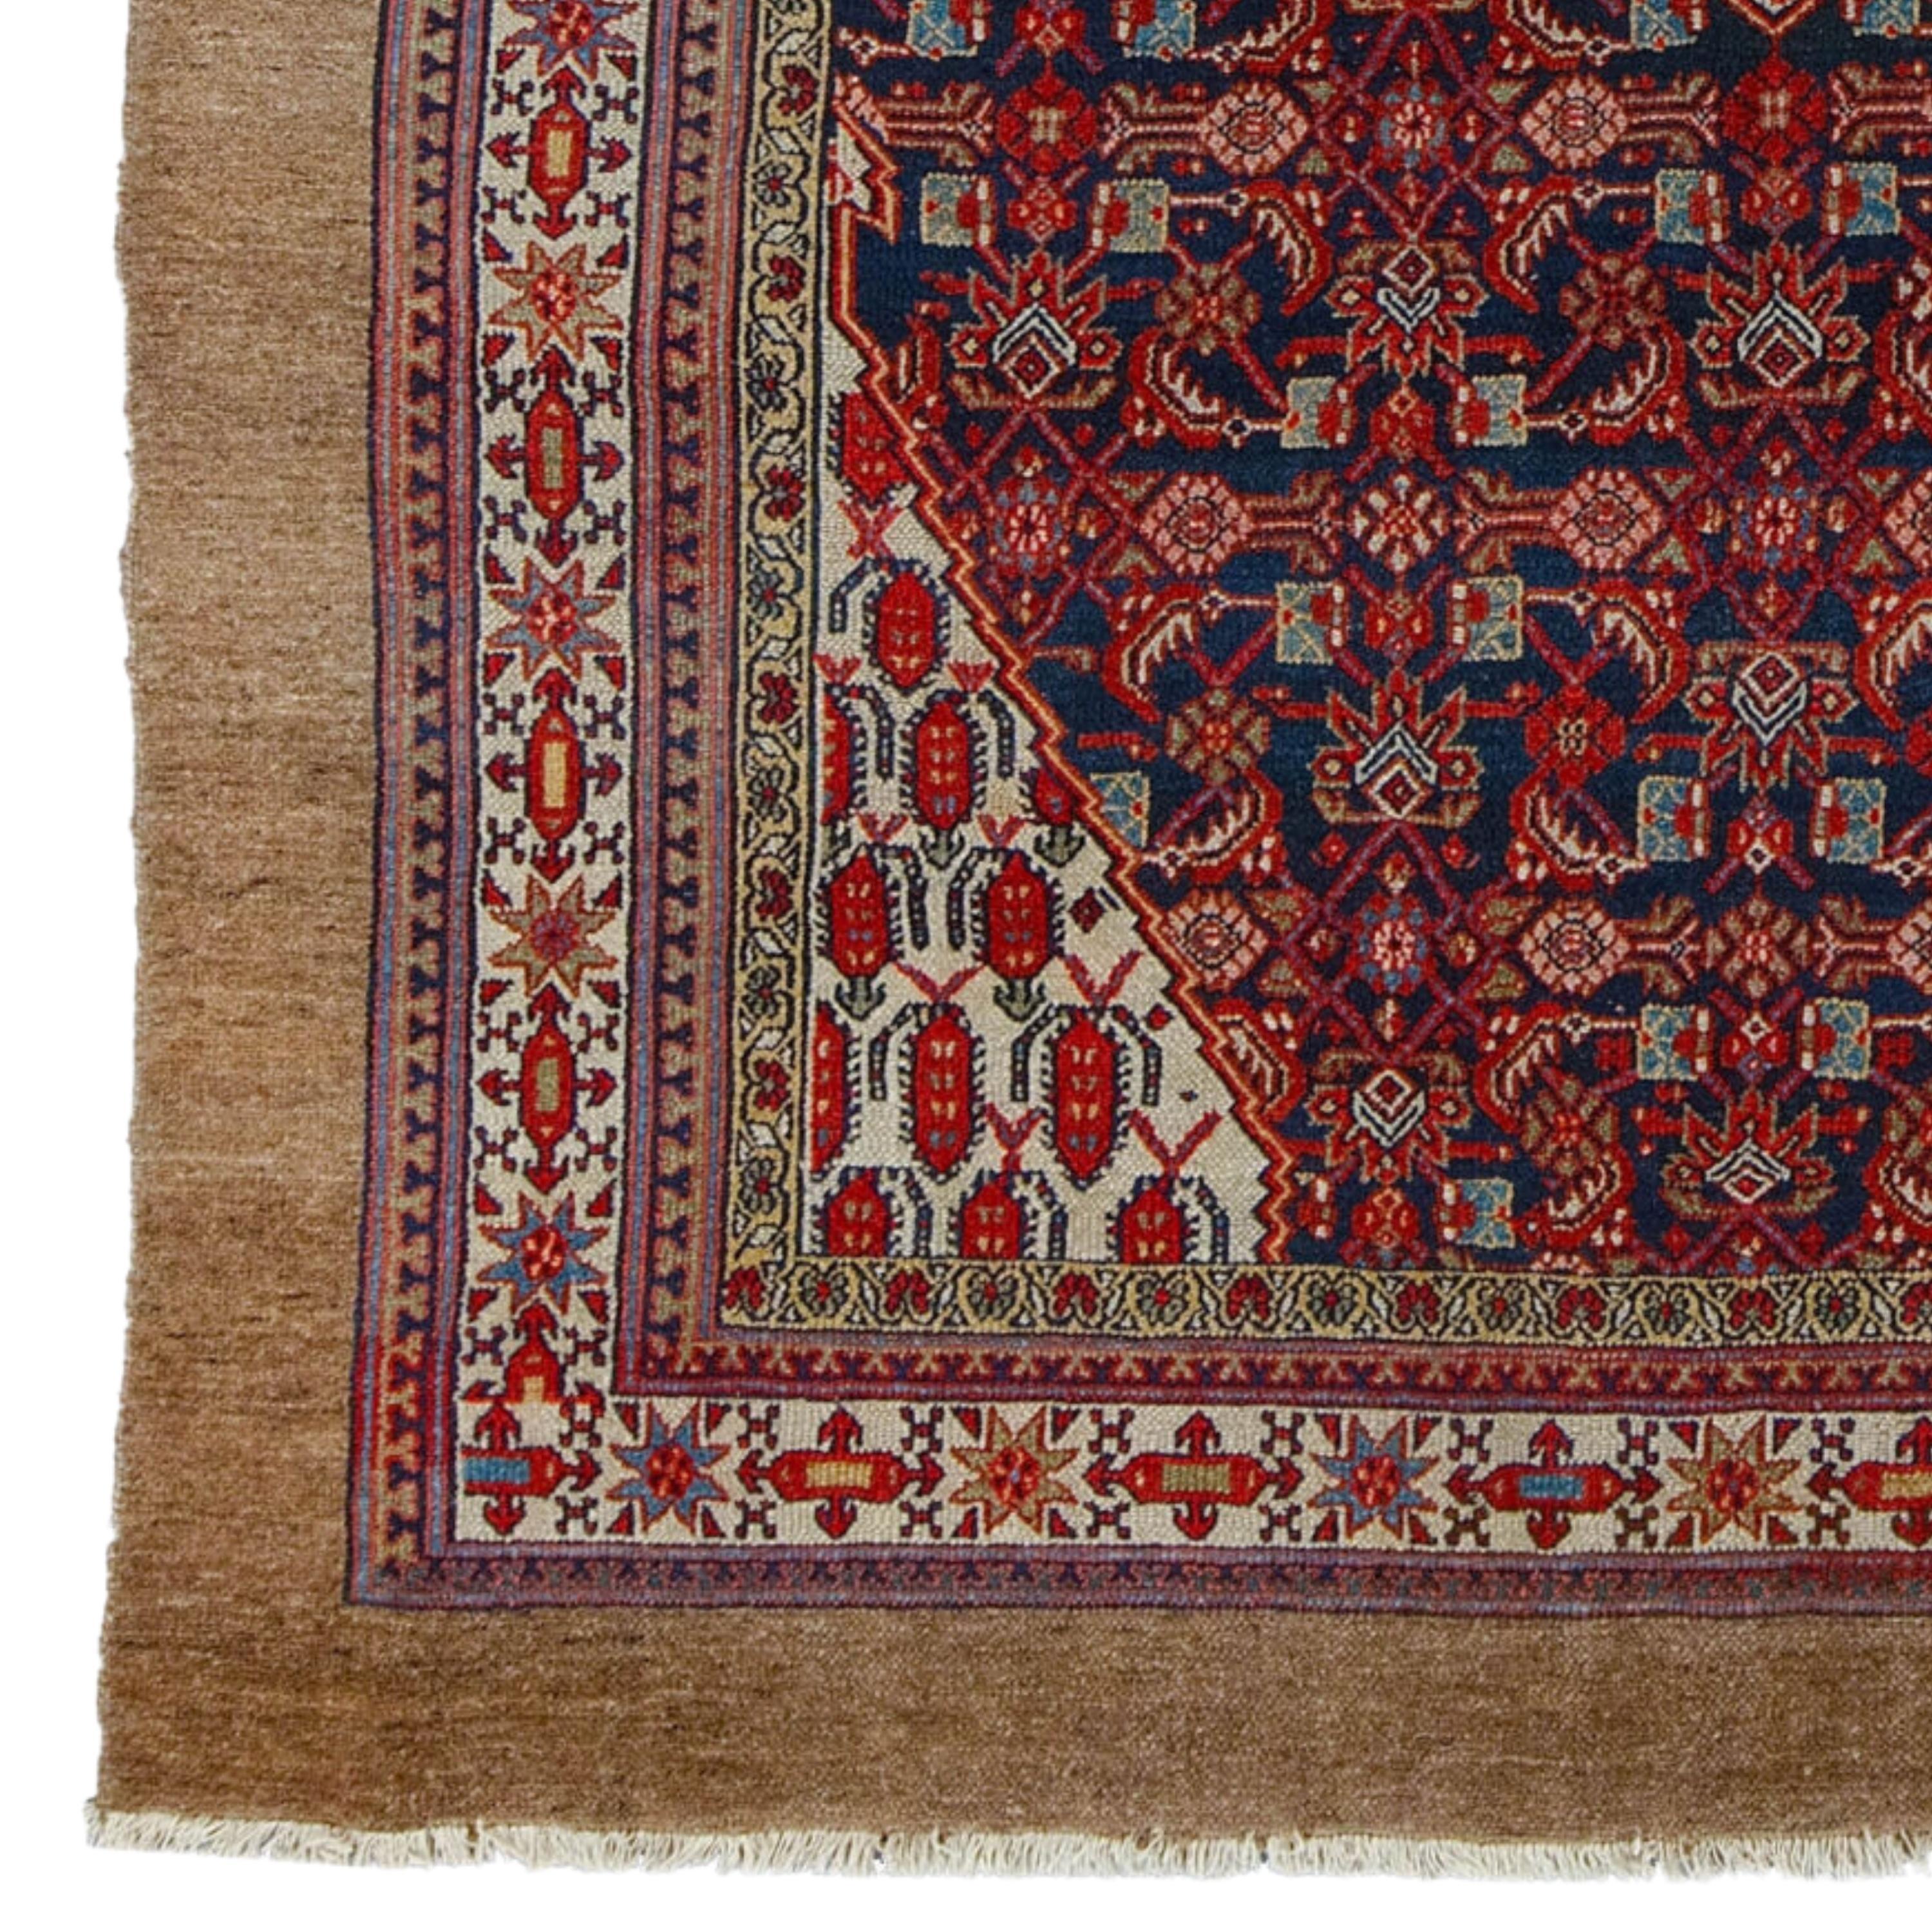 Antique Hamadan Rug 217x360 cm (7,11x11,81 ft) Late of 19th Century in Good Condition

The Hamadan carpet is one of a wide variety of hand-woven floor coverings made in the region surrounding the ancient city of Hamadan (Ecbatana) in the Middle East